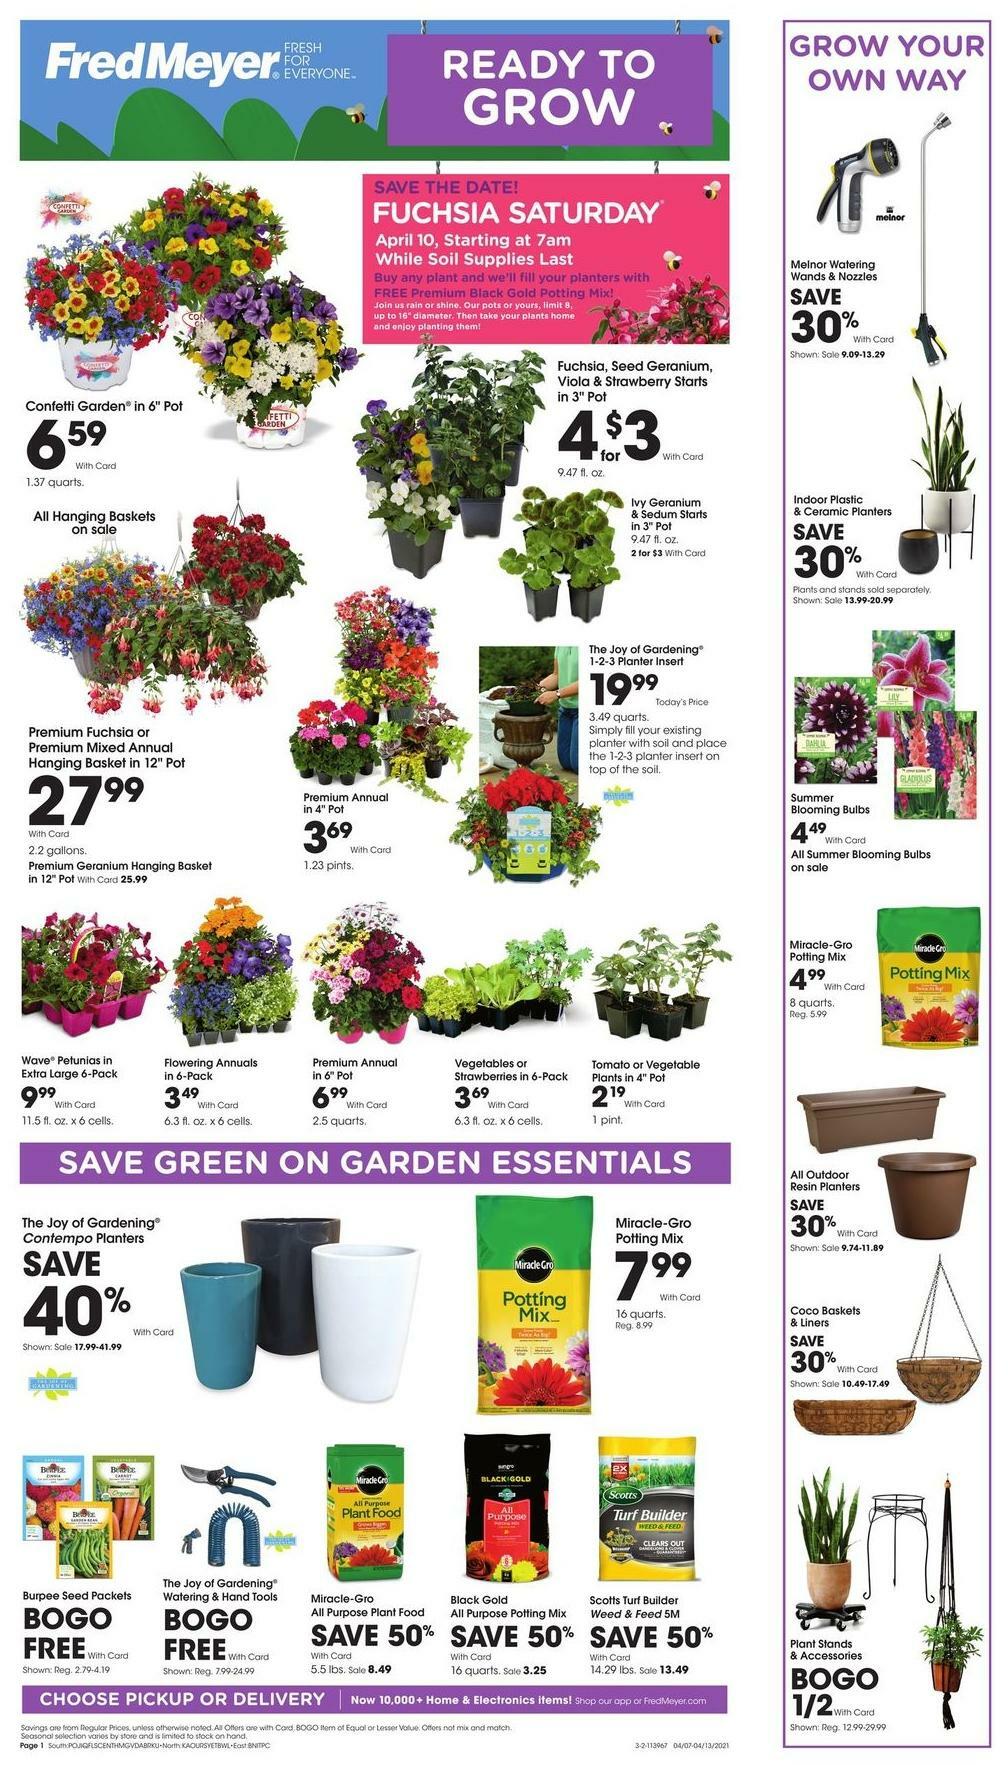 Fred Meyer Garden Weekly Ad & Specials from April 7